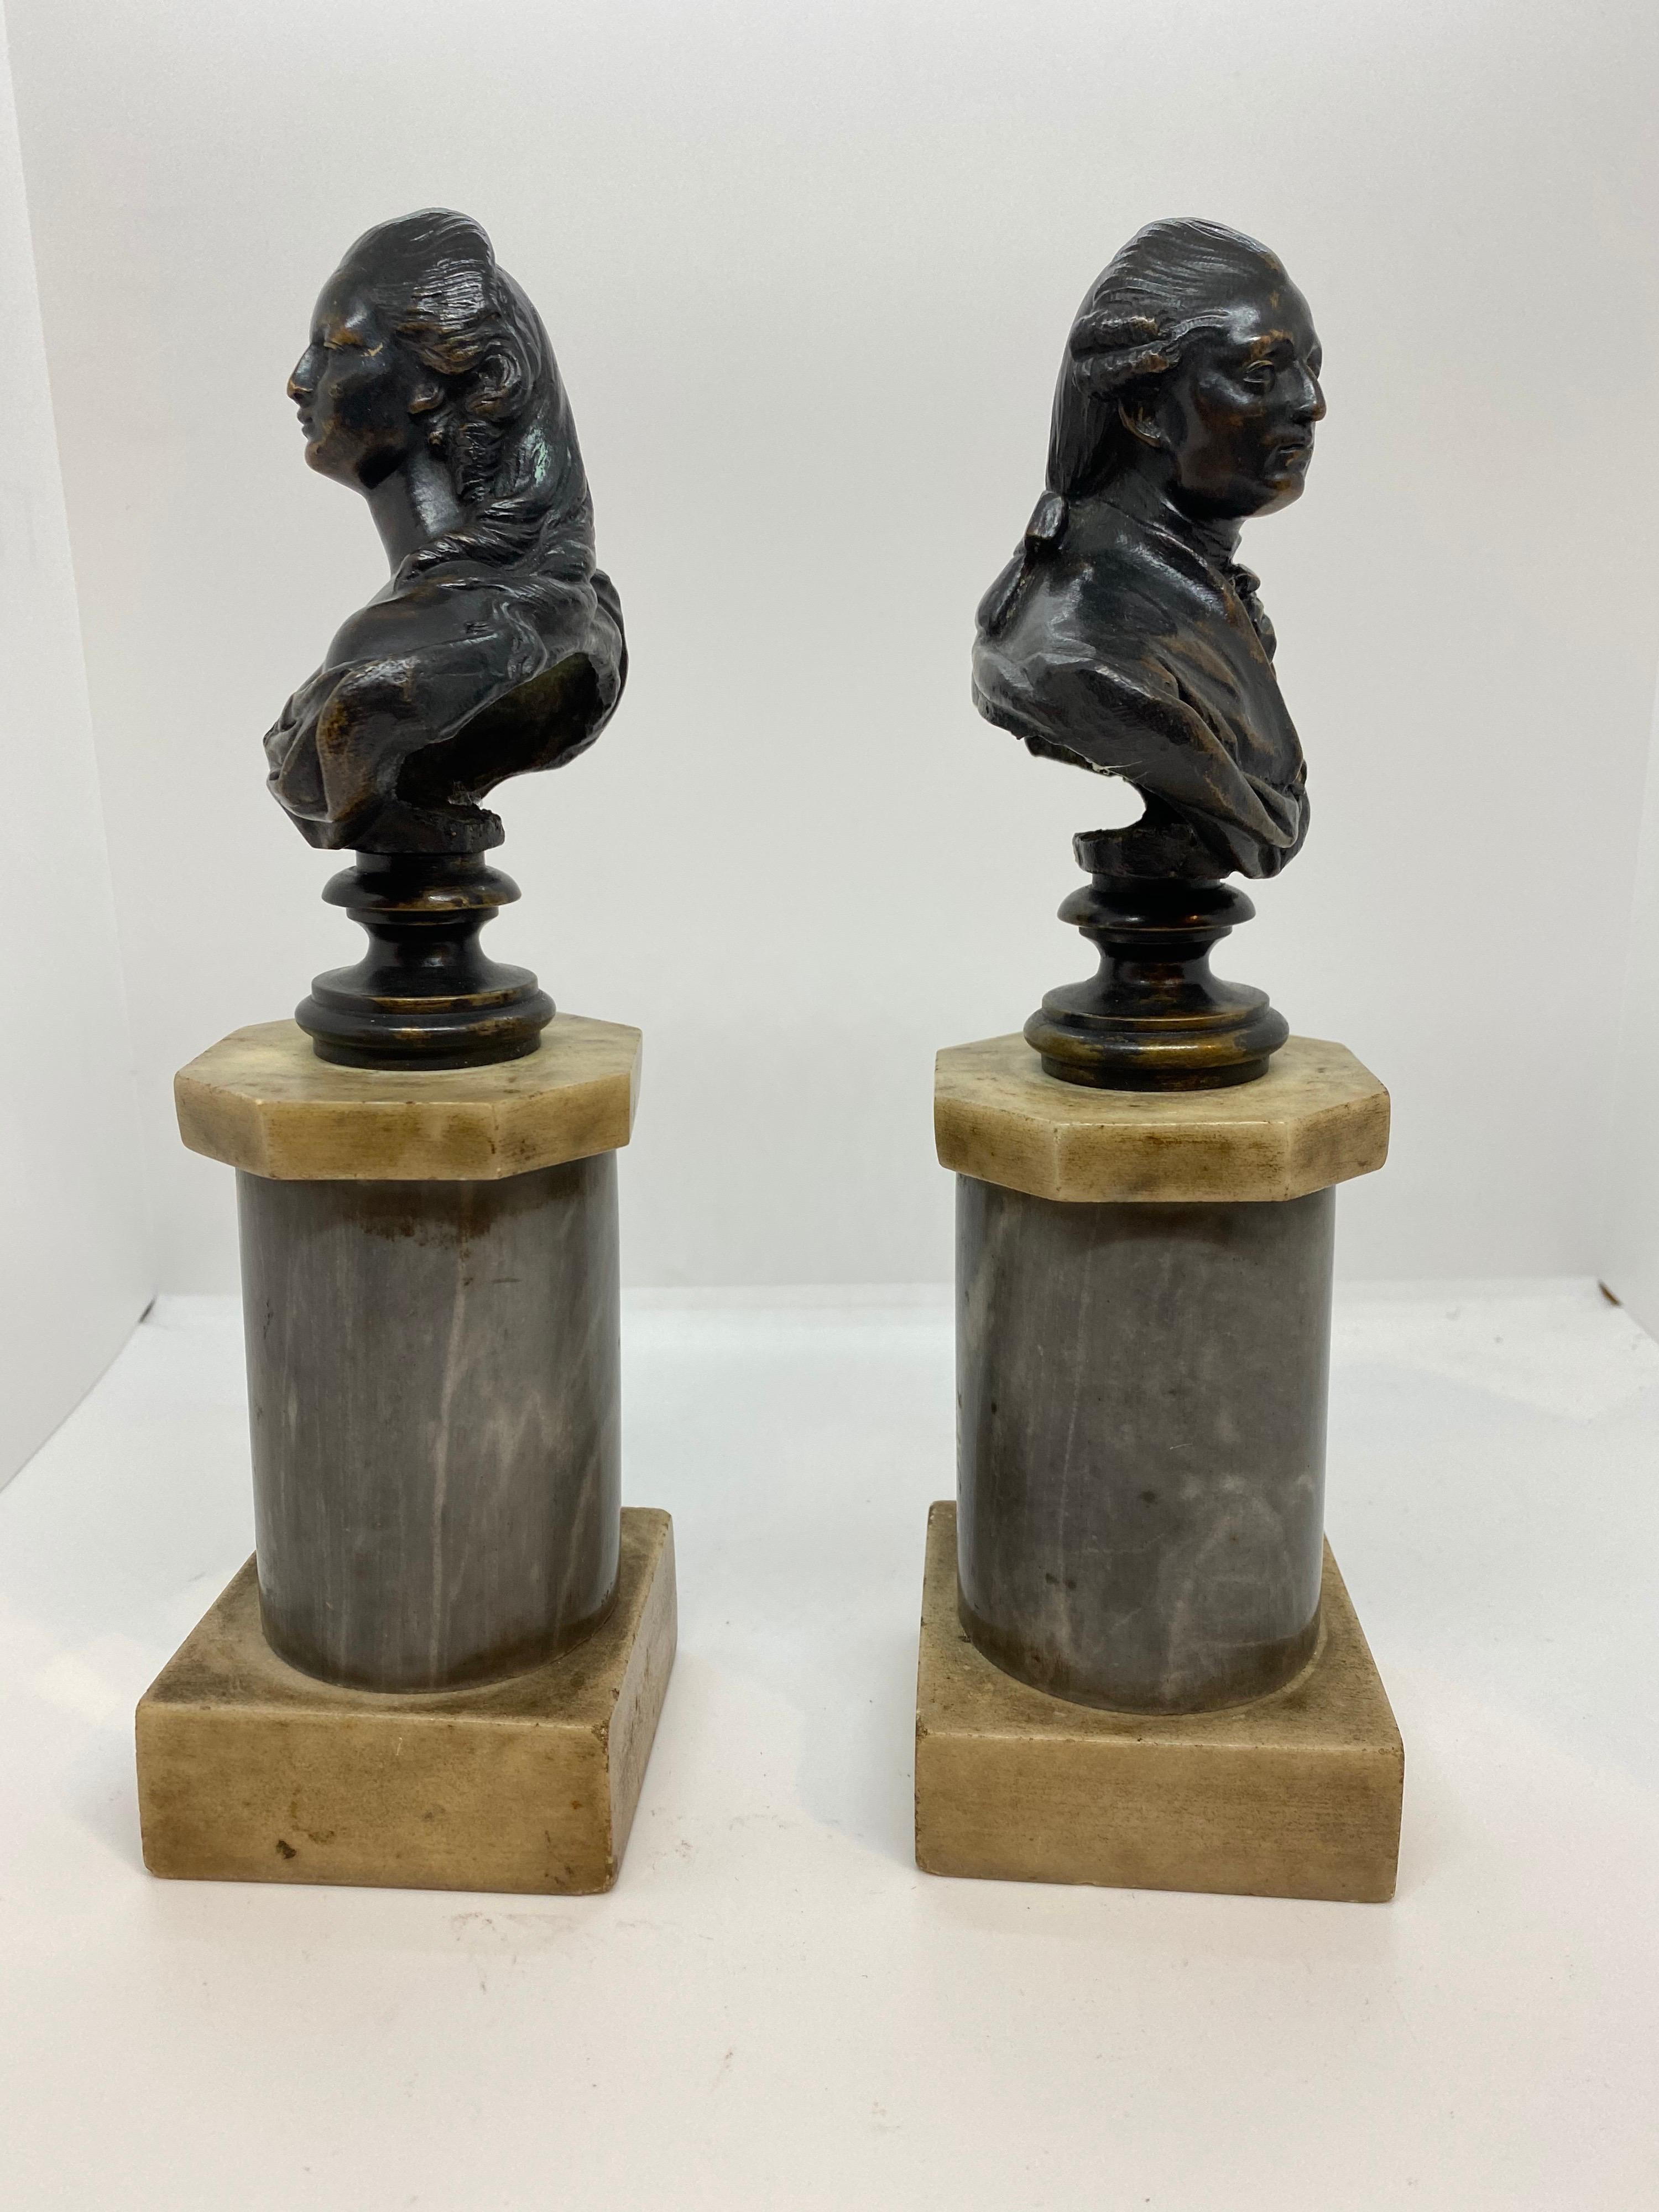 French patinated bronze busts of Louis XVI and Marie Antionette of France. Mounted on a columnar plinth of white and saint Anne gray Mable.